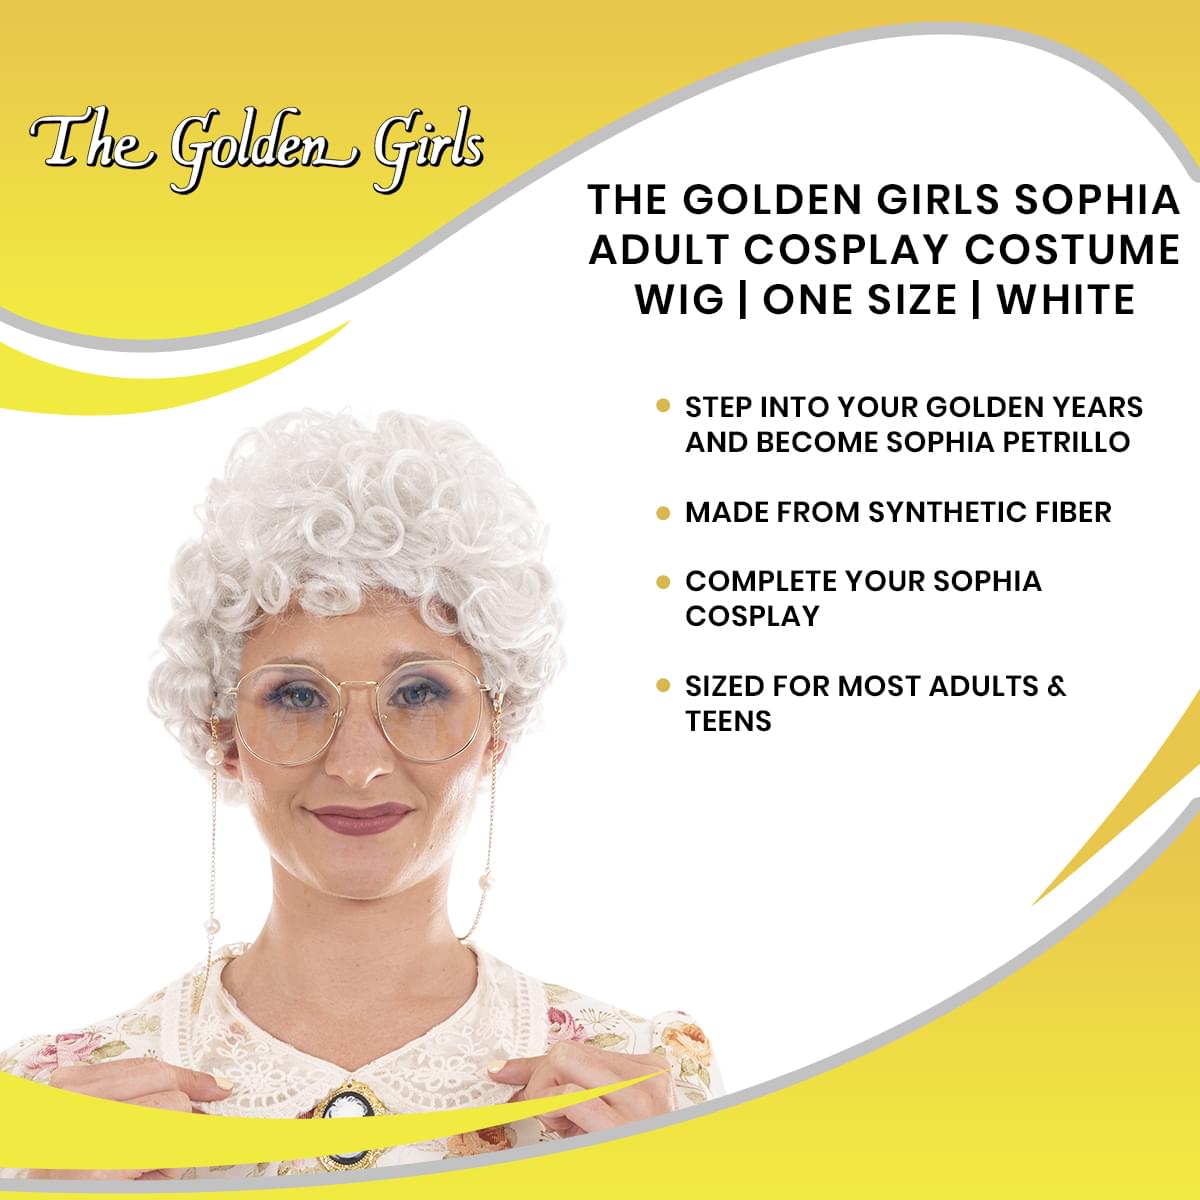 The Golden Girls Officially Licensed Sophia Costume Cosplay Wig